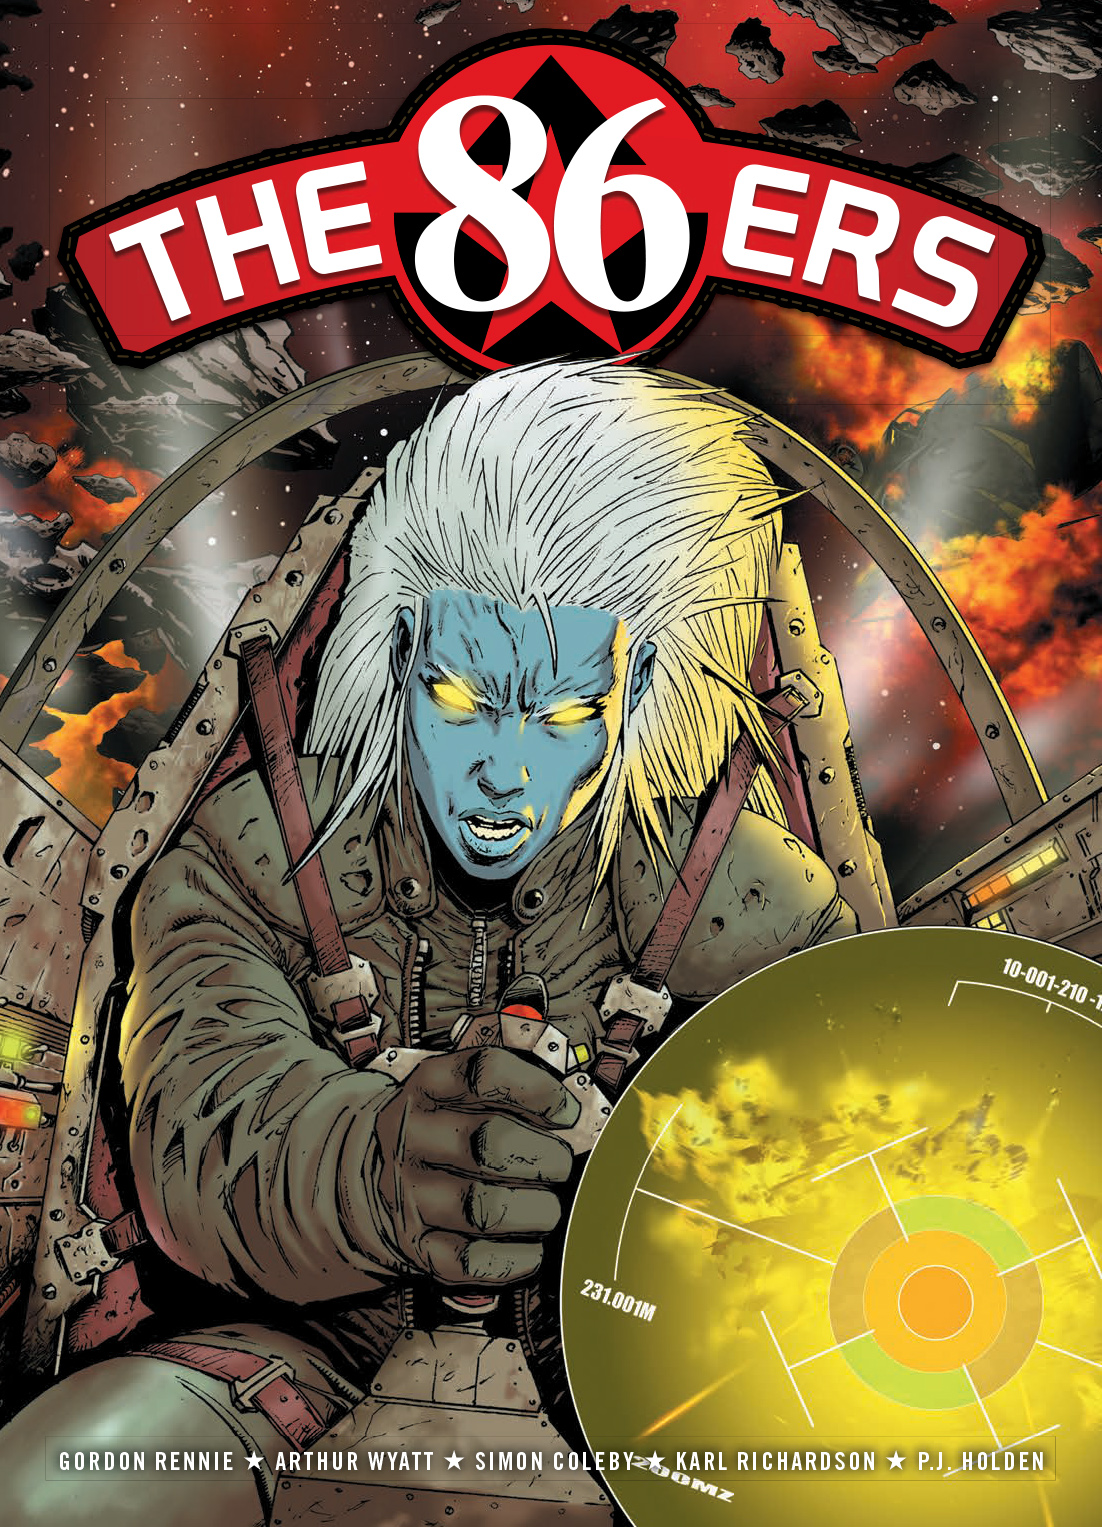 Read online The 86ers comic -  Issue # TPB - 1